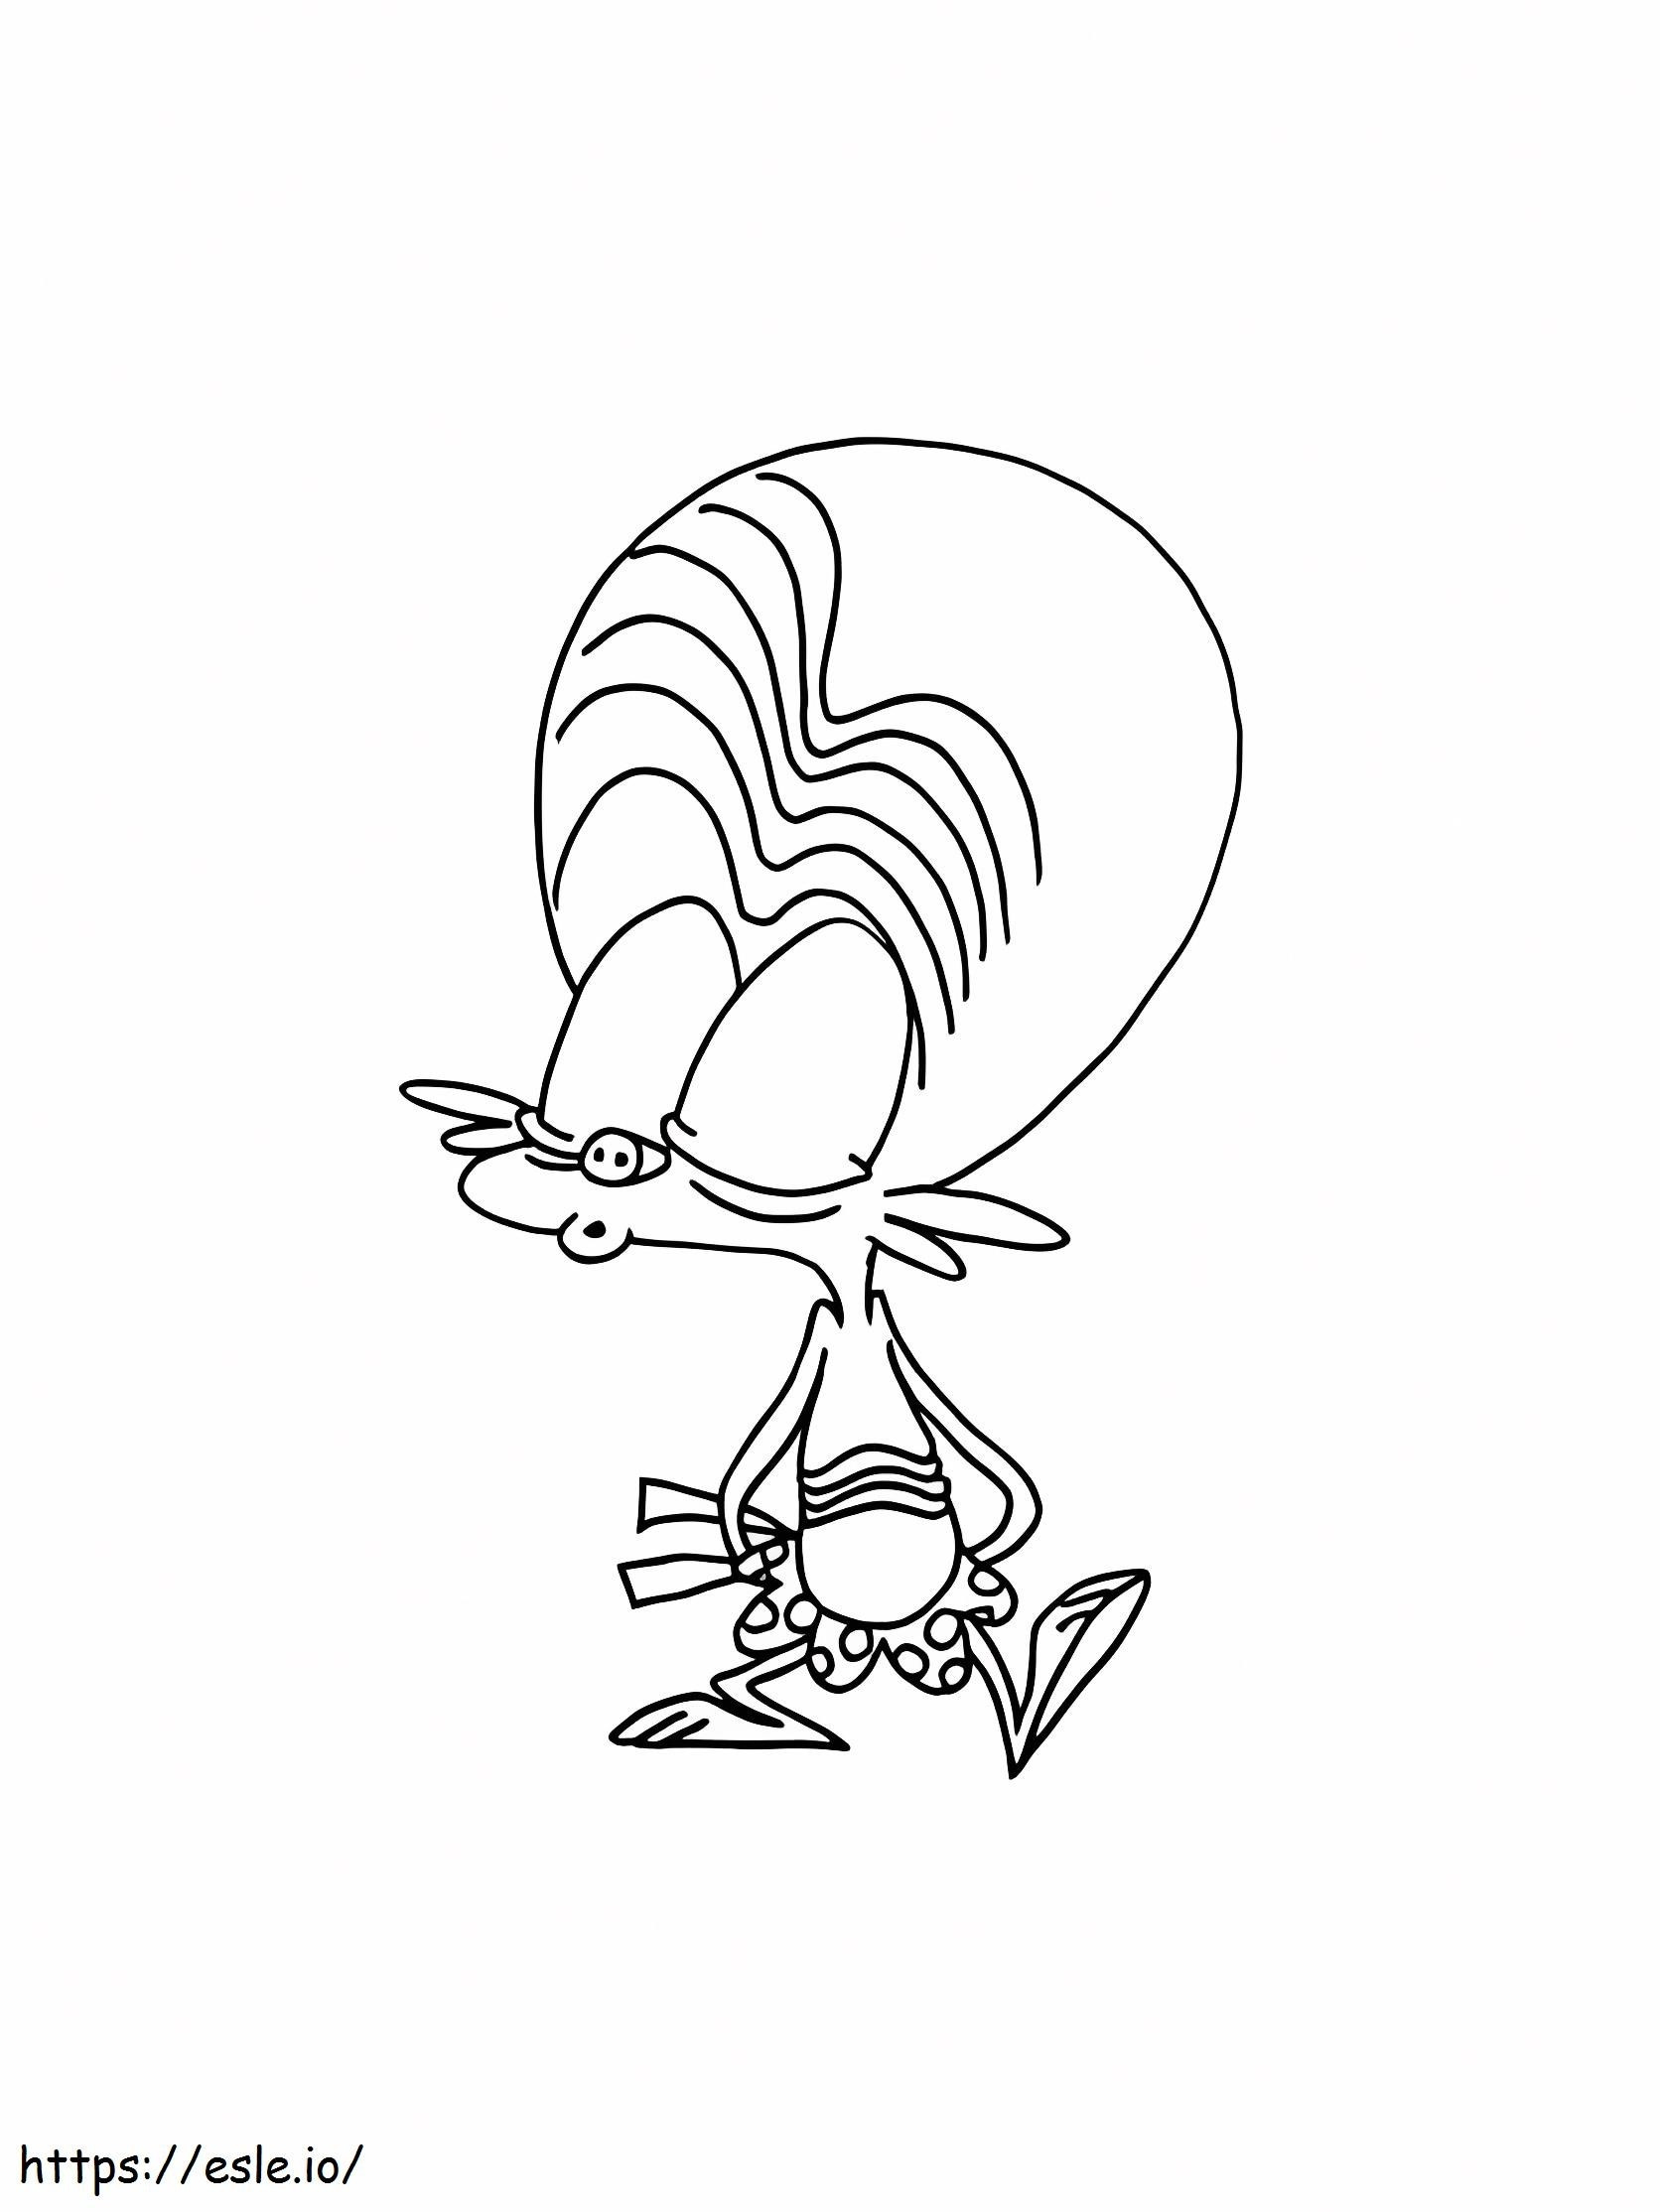 Candy Candy Space Goofs coloring page